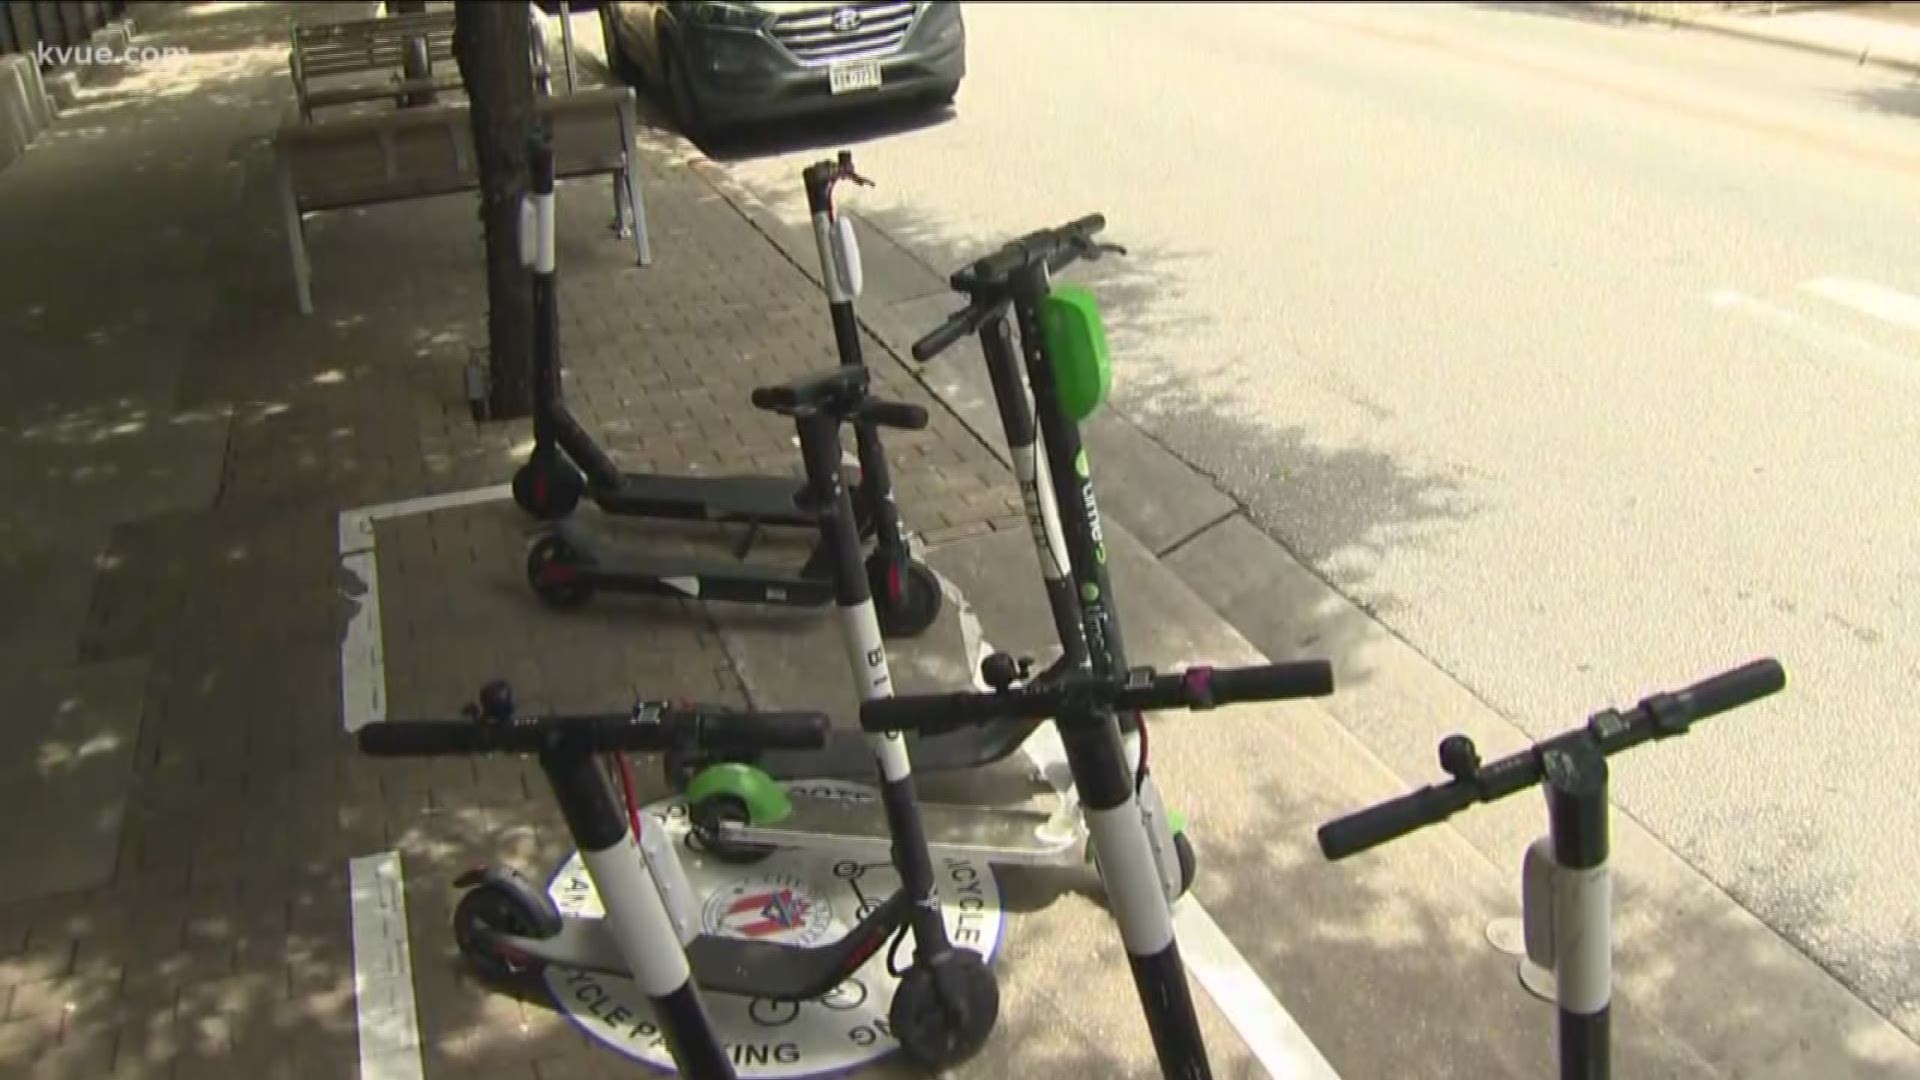 The Austin City Council approved new rules for scooters – but a vote on rules for scooter companies could be on hold.